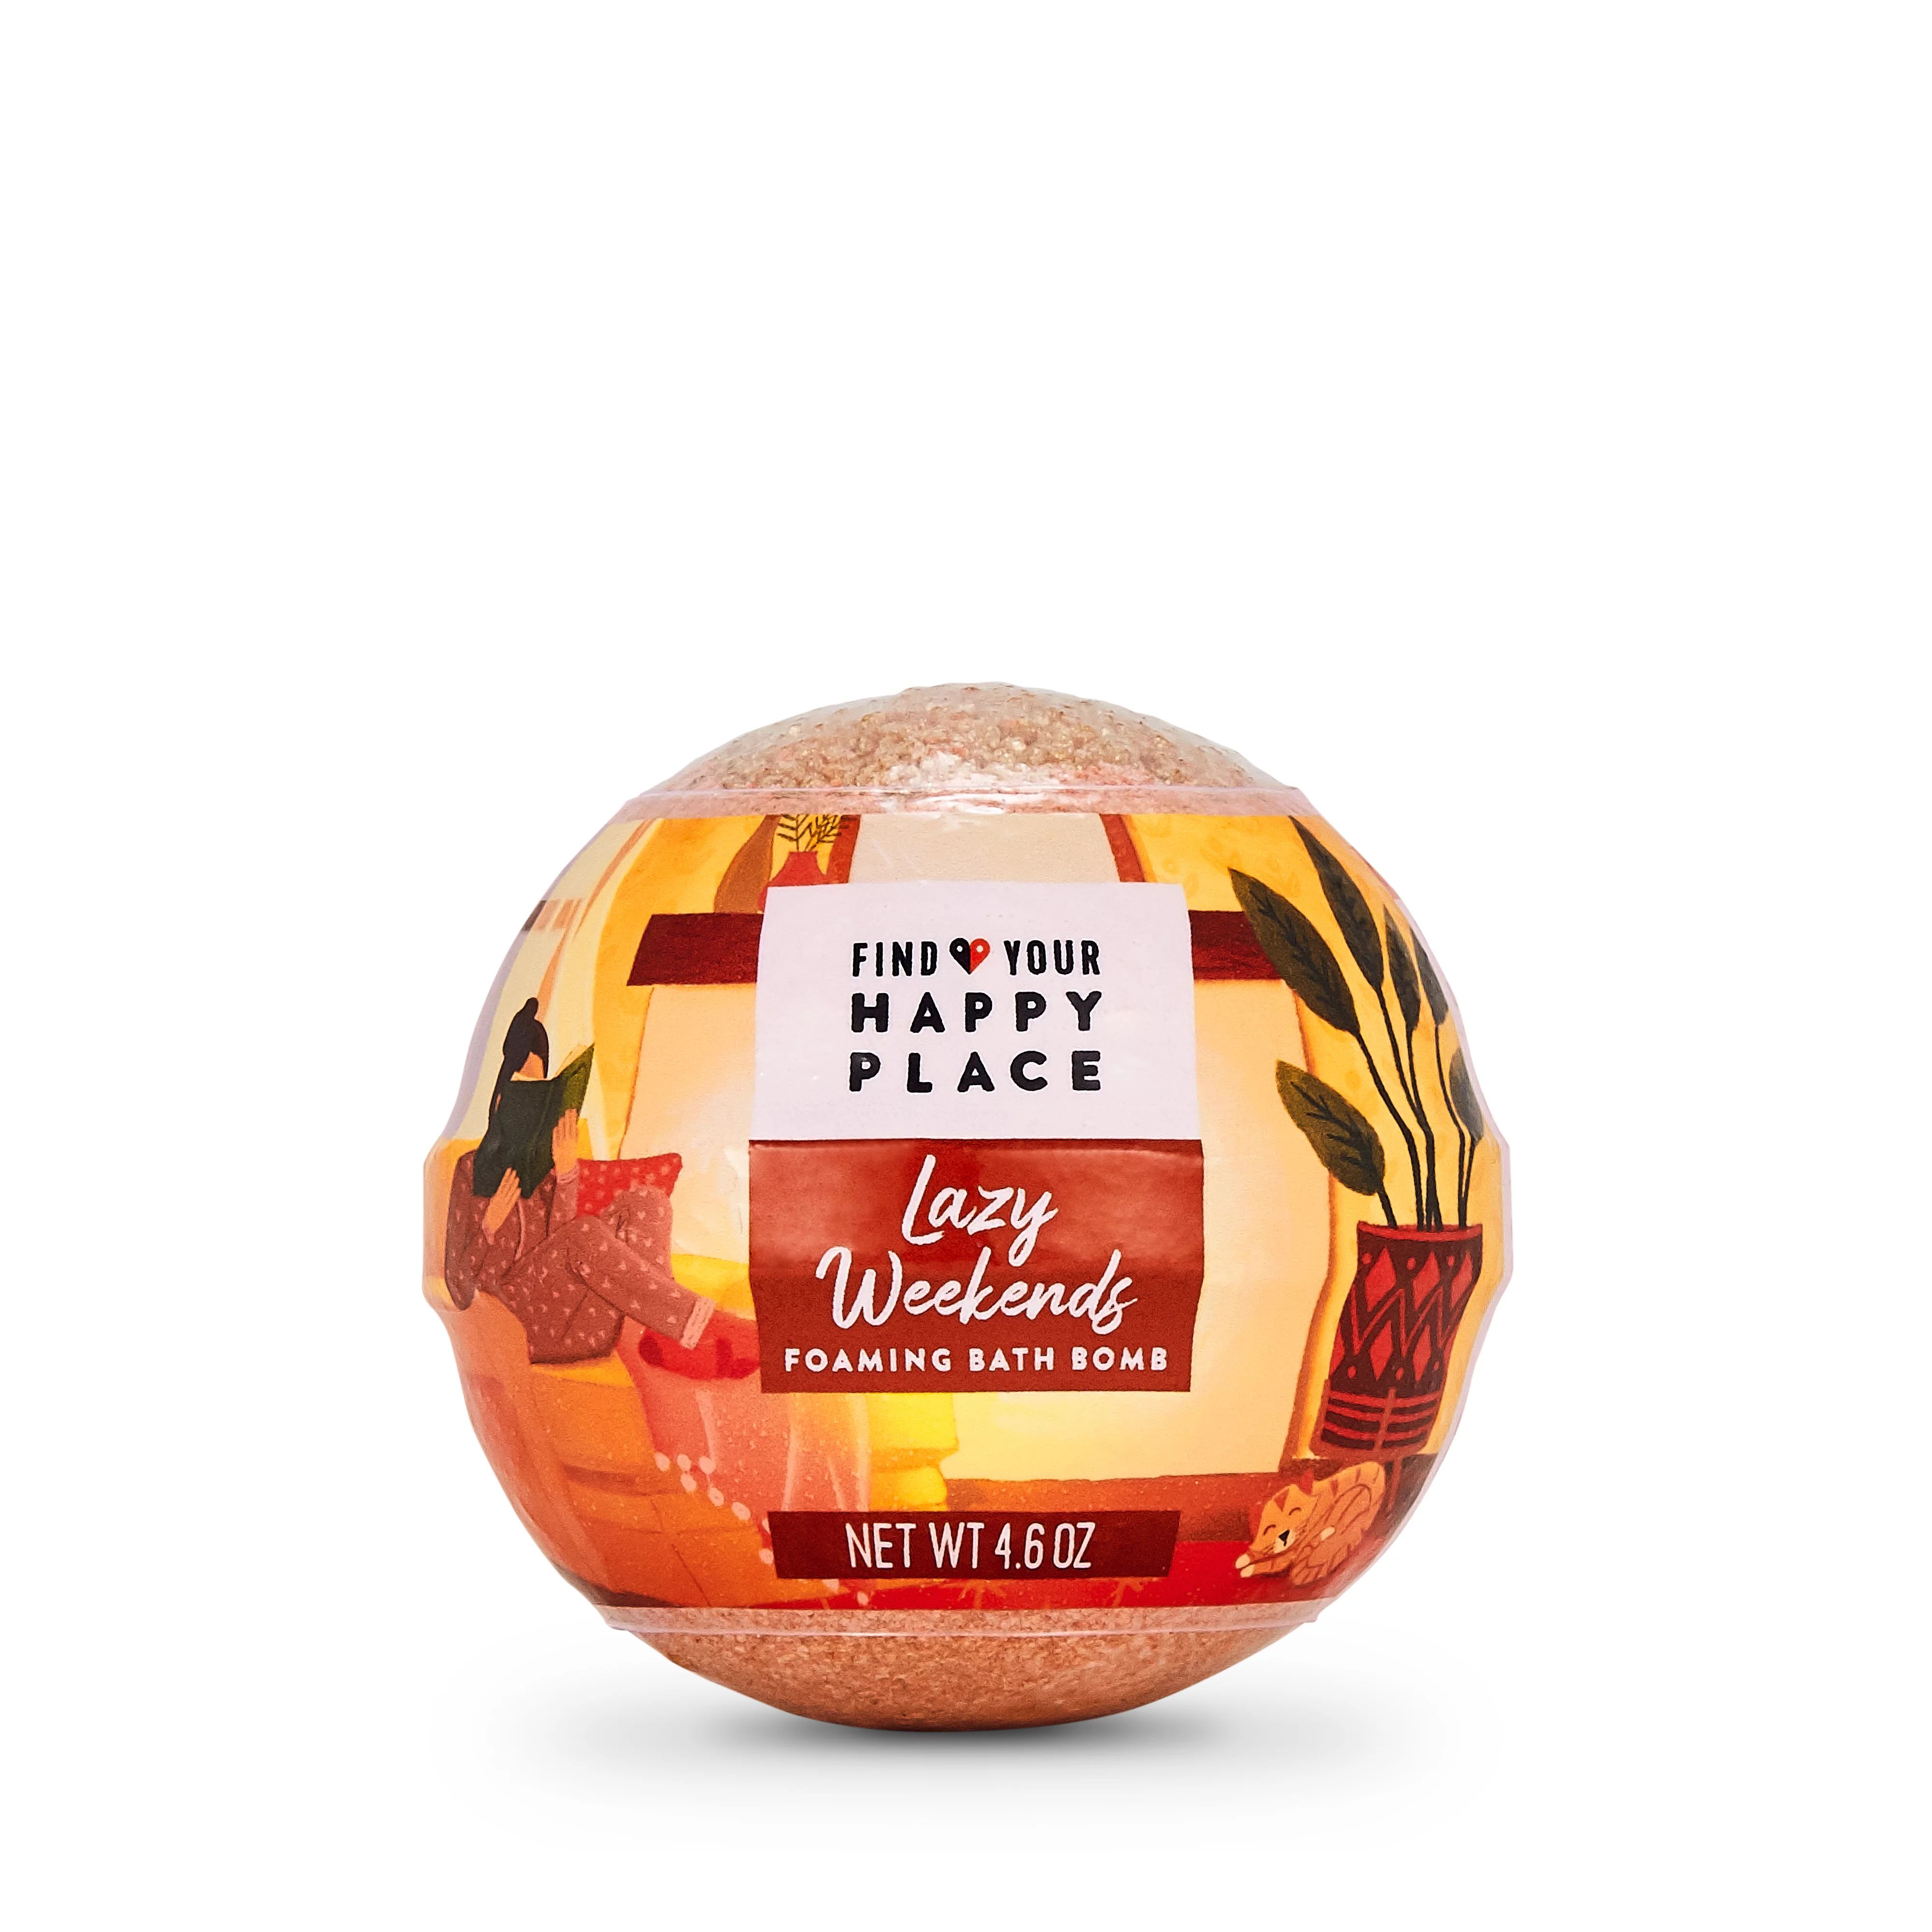 Find Your Happy Place Foaming Luxurious Bath Bomb, Lazy Weekends, Almond And Vanilla Bean, 4.6 oz | Walmart (US)